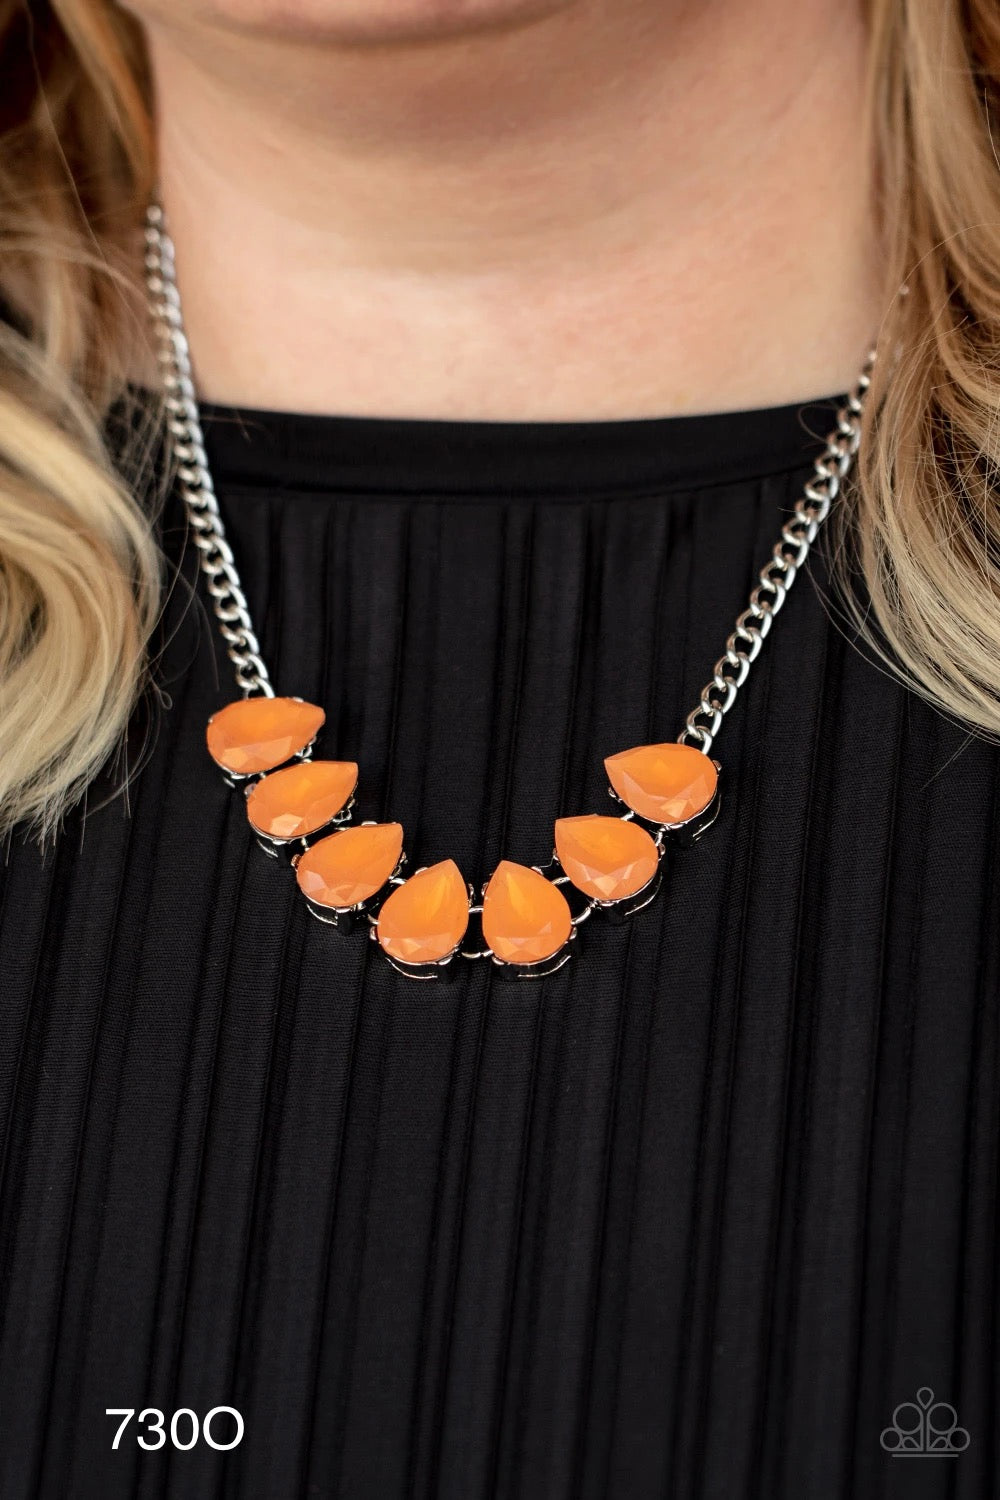 Paparazzi “Above The Clouds” - Orange - Necklace Earring Set